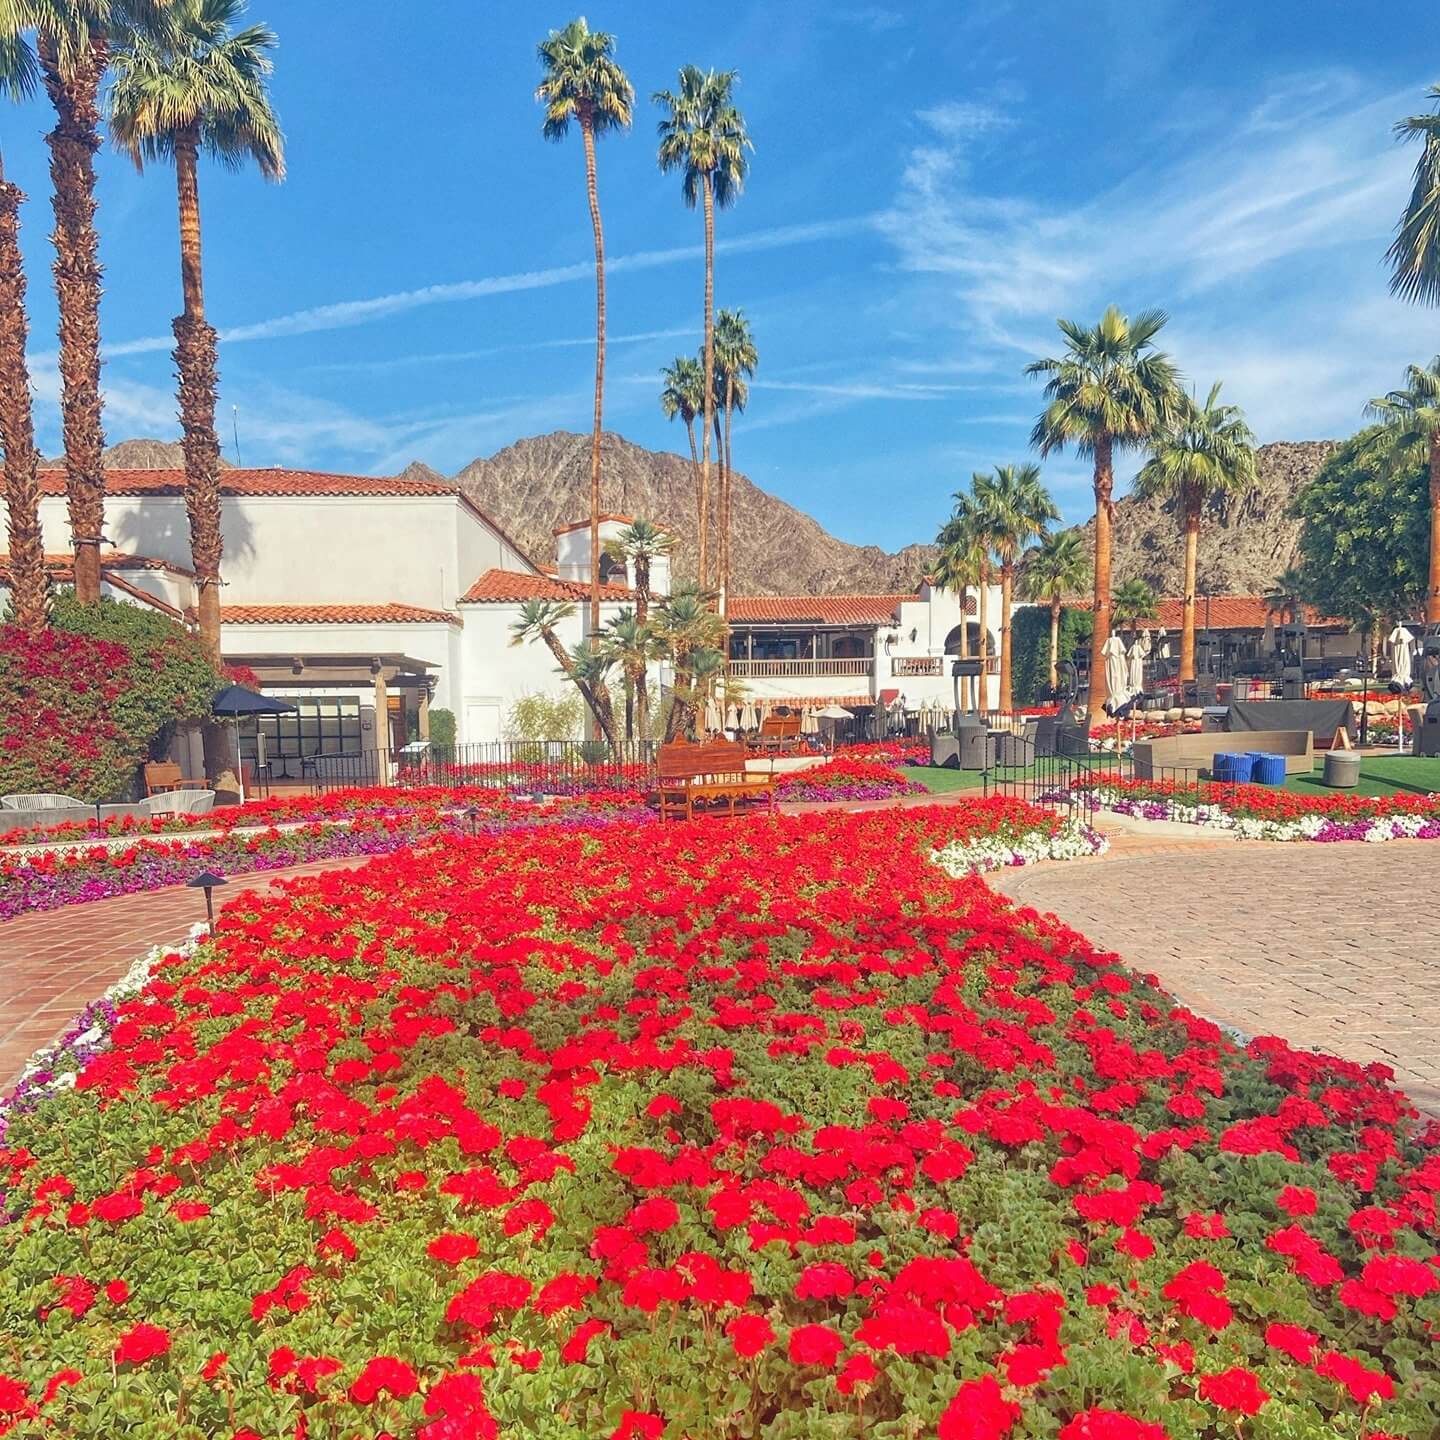 Top 5 Things To Do This Summer in La Quinta Featured Image